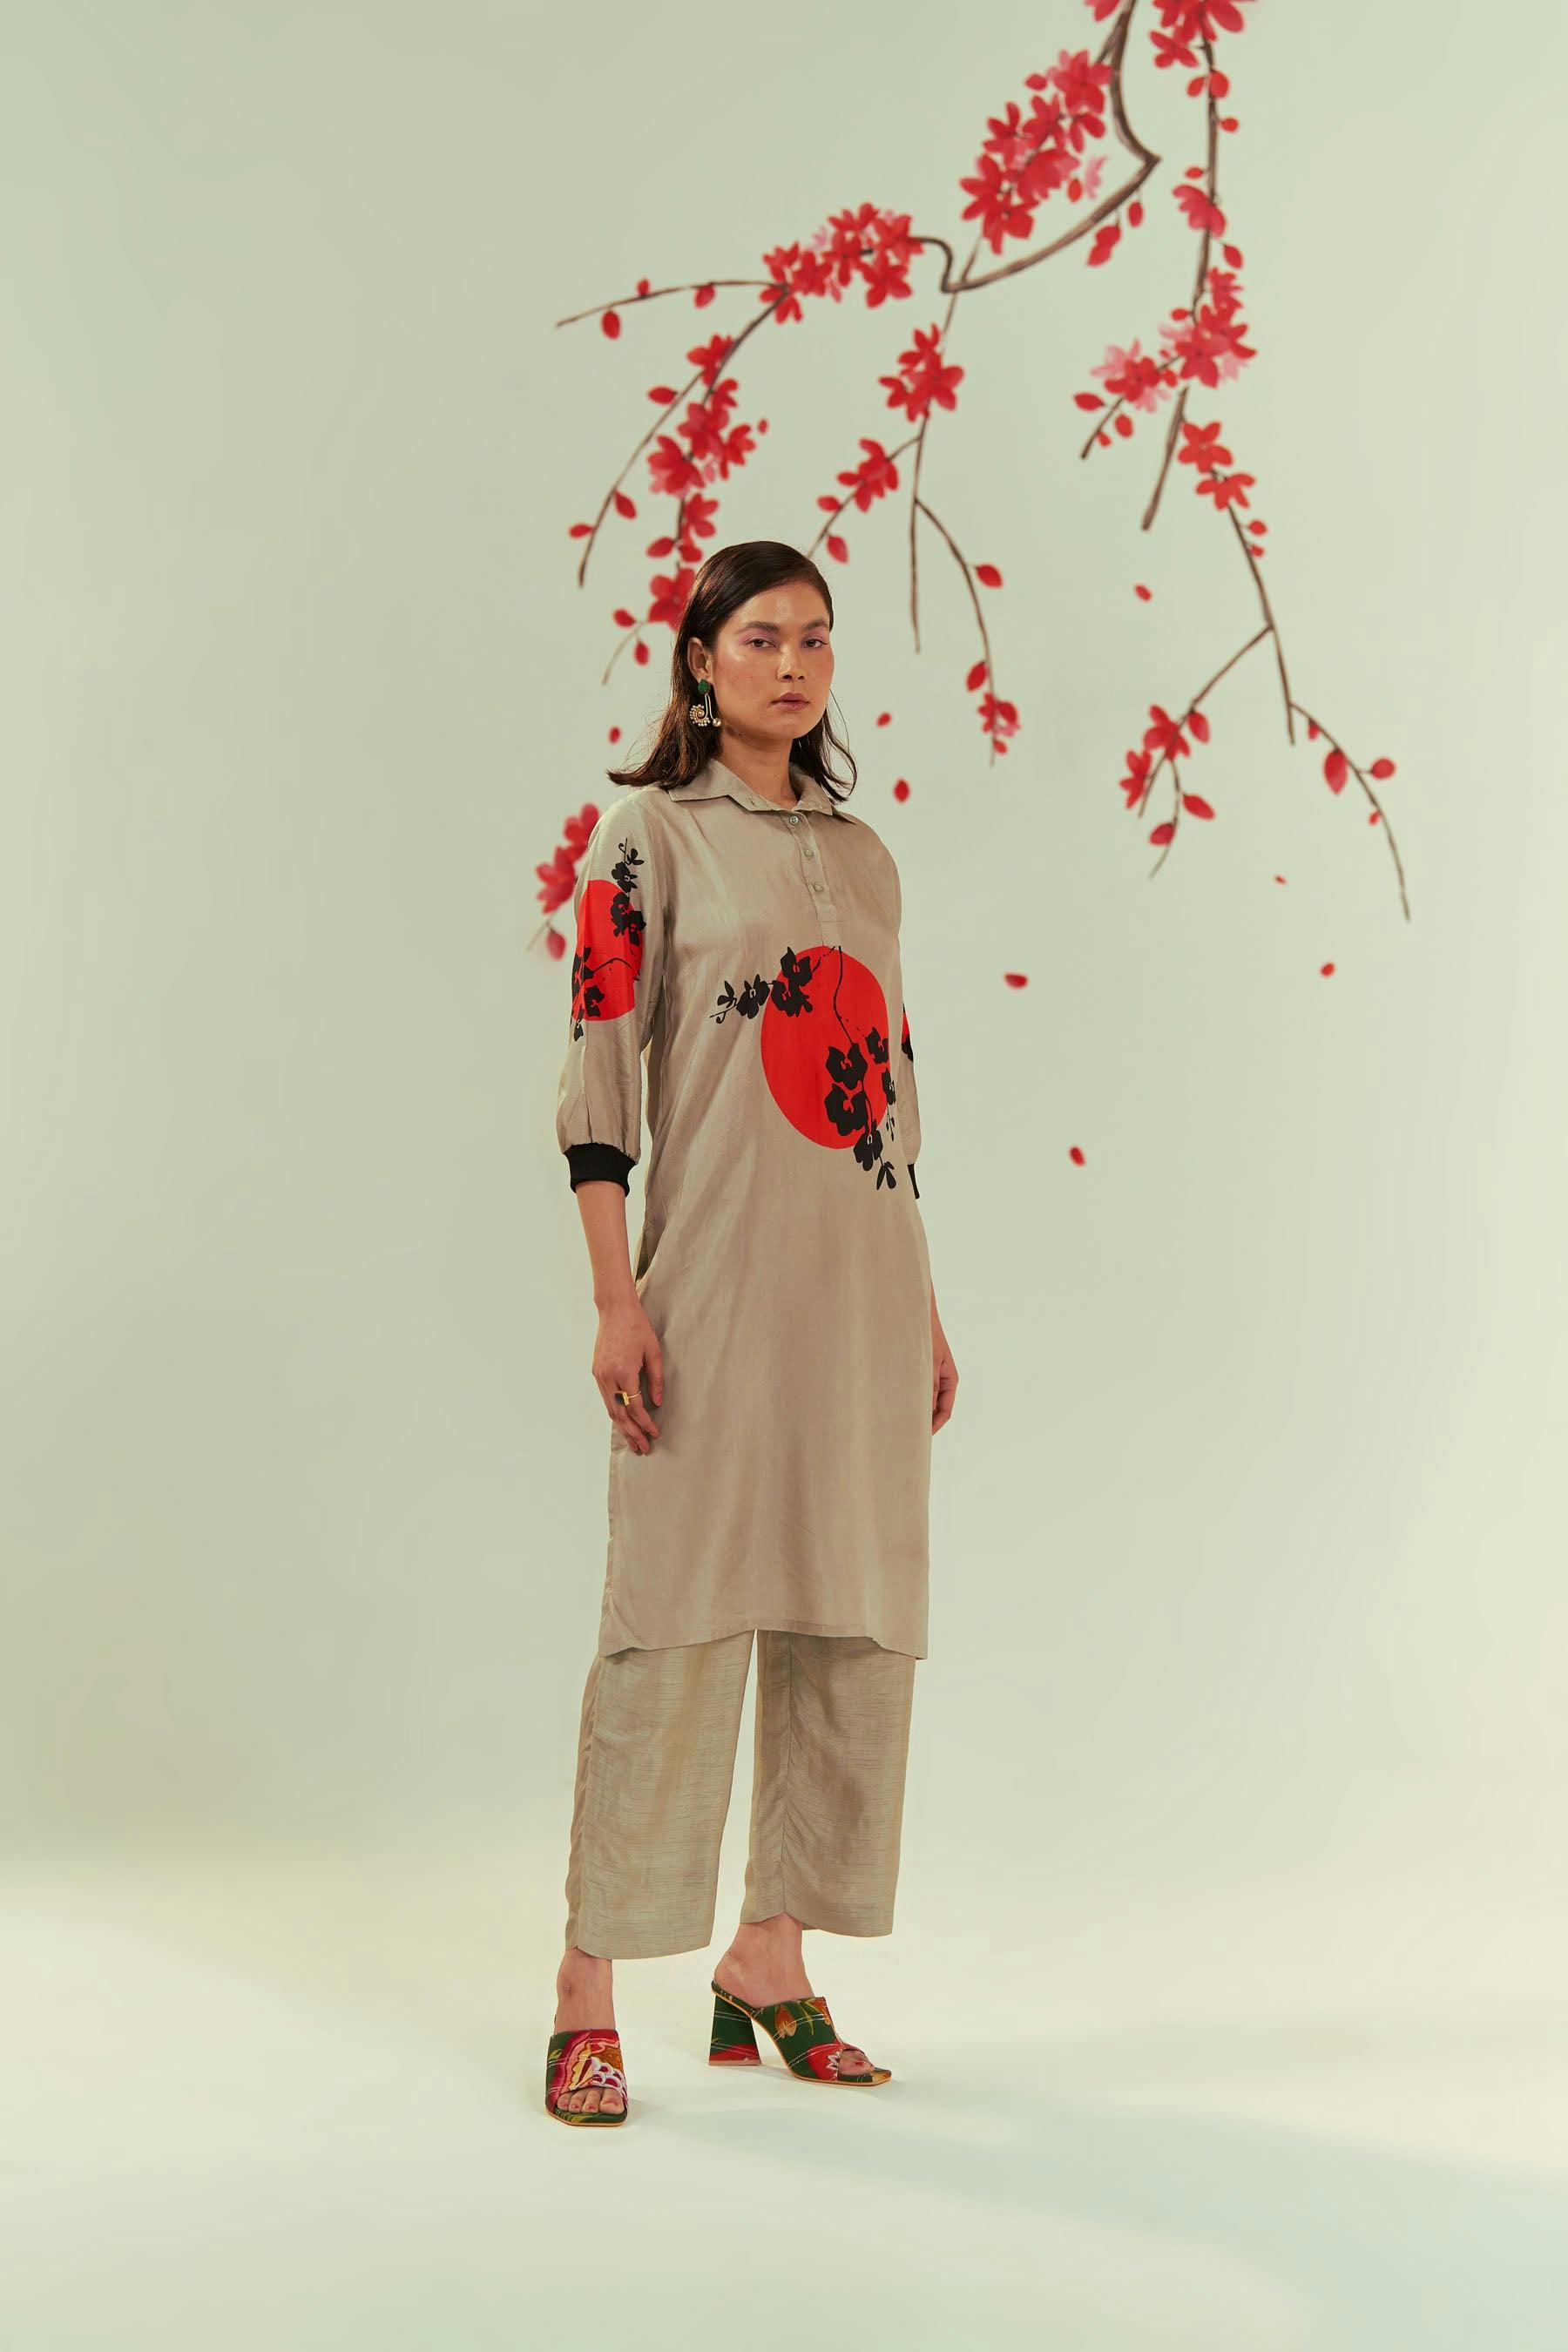 Yugen Bloom Collared Tunic Top And Pants Co-ord Set, a product by COEUR by Ankita Khurana